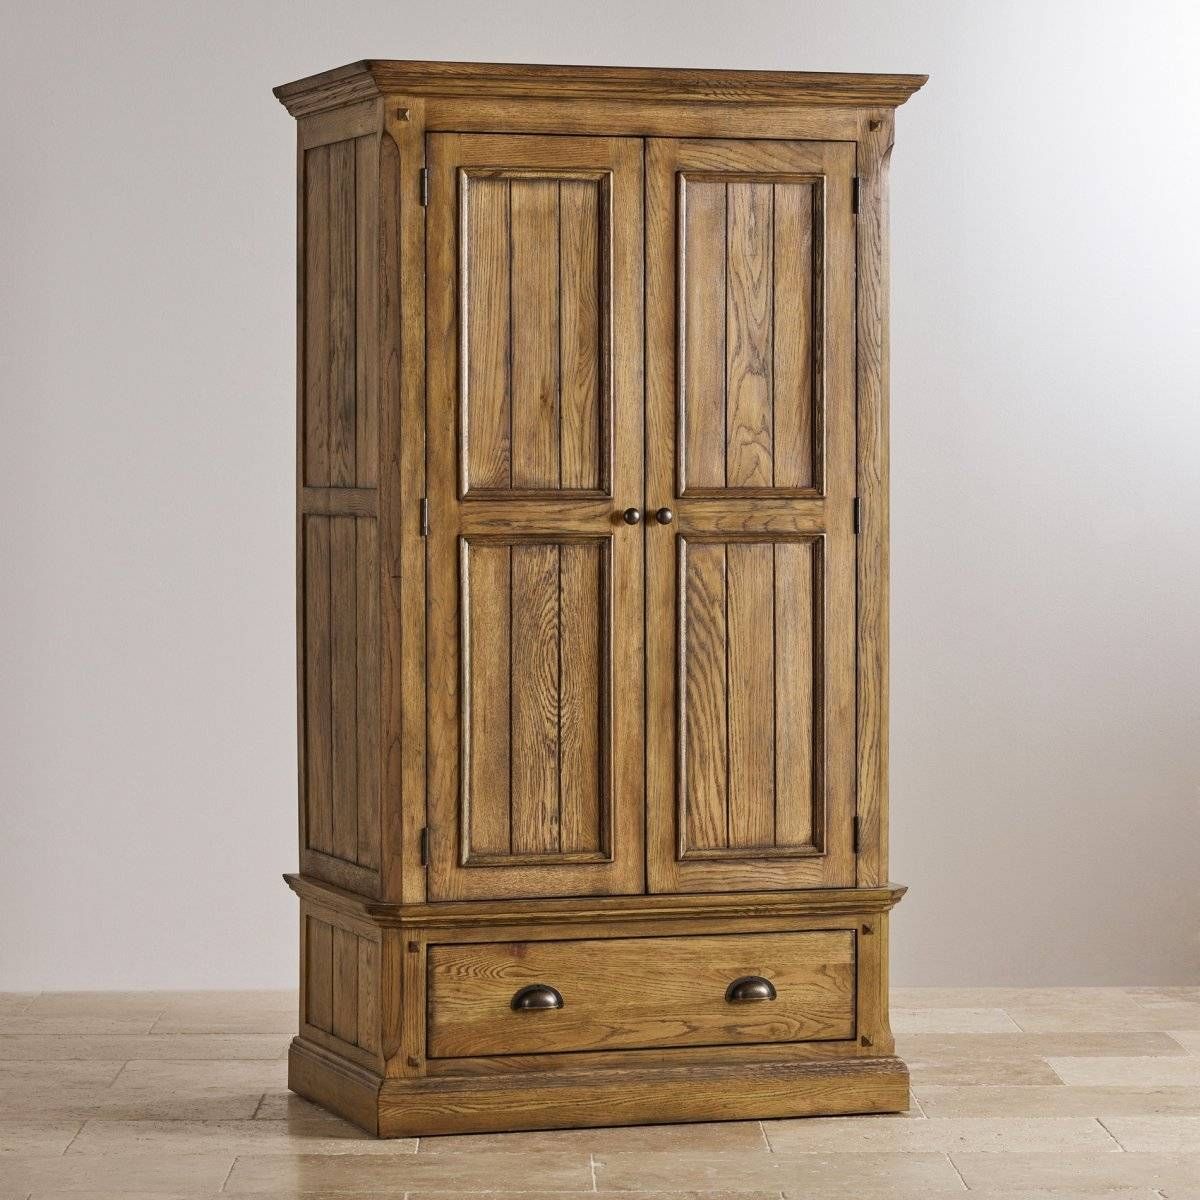 Manor House Double Wardrobe In Solid Oak | Oak Furniture Land With Regard To Double Wardrobes (View 11 of 15)